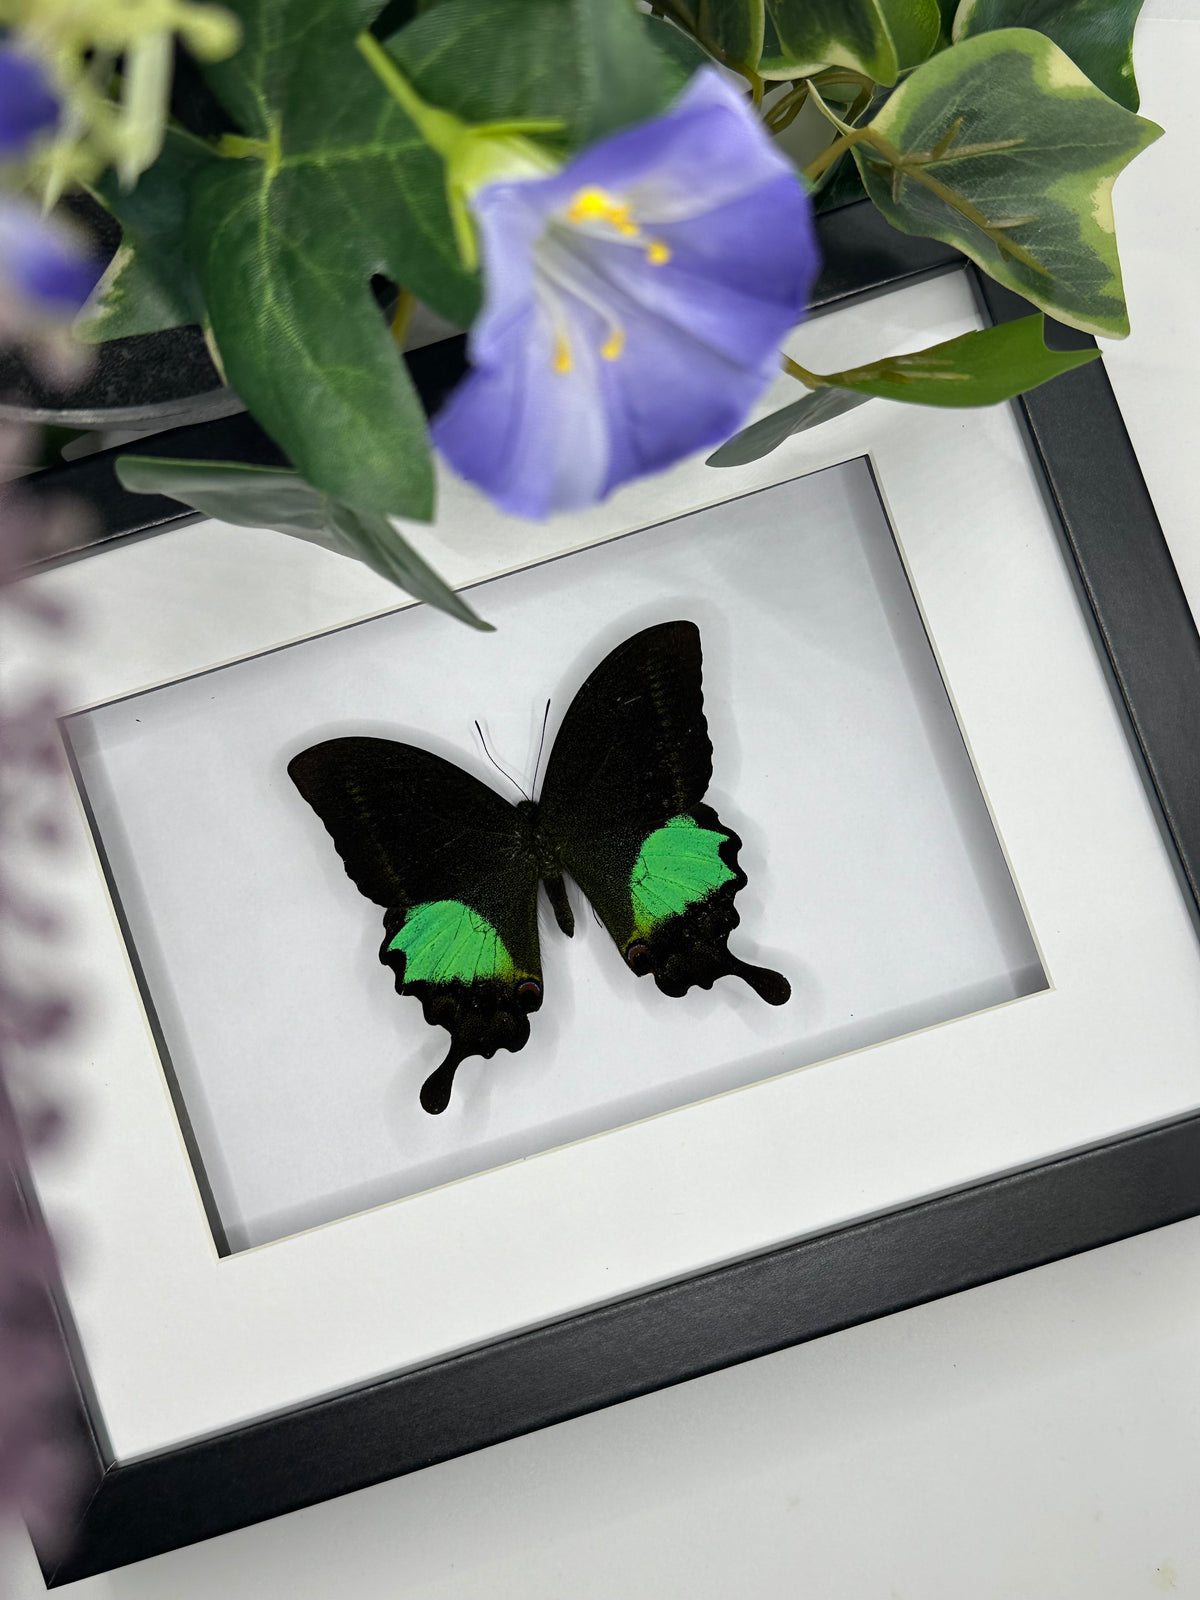 Papilio Karna in a frame